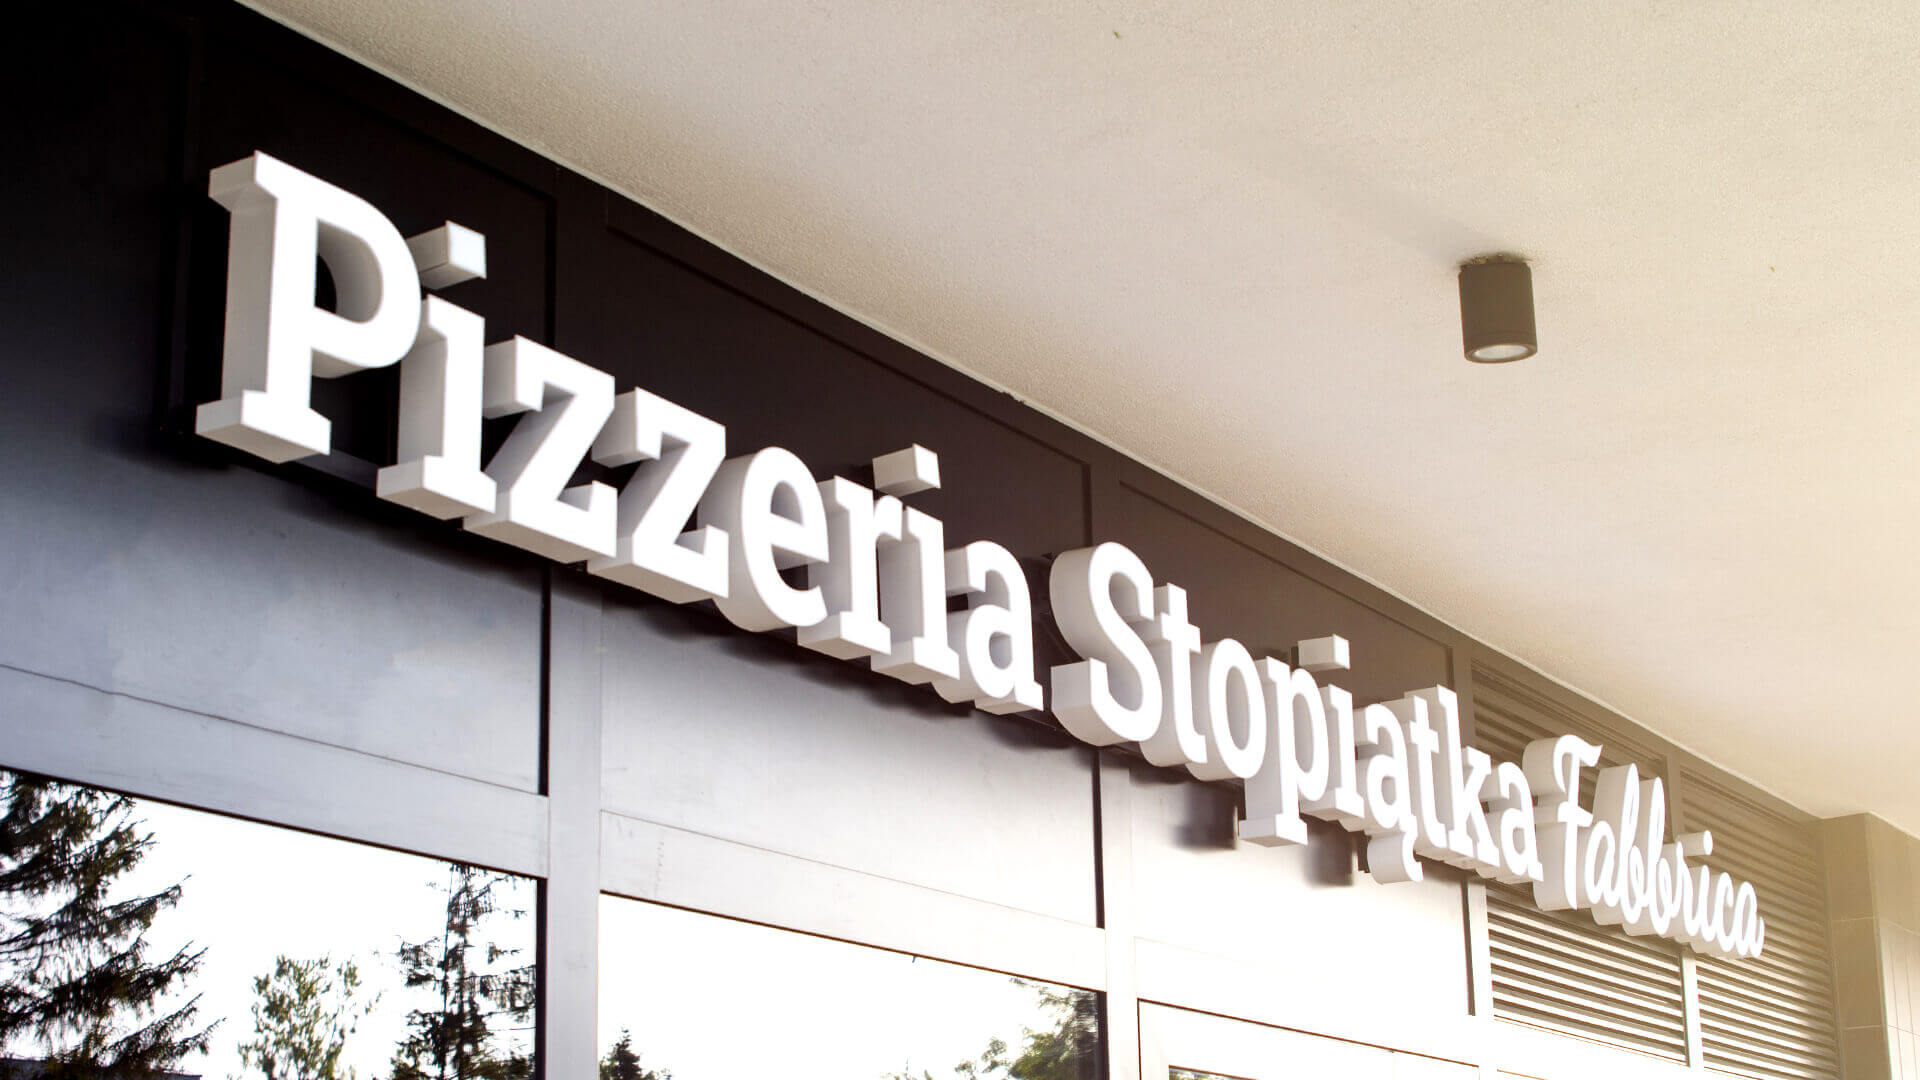 105 pizza pizzeria restaurant  - pizzeria-105 lettering-spatial-illuminated-led-lettering above-entry-restaurant-white-lettering-on-the-wall-lettering-on-the-base-lettering-on-the-height-gdansk-morena- (19) 